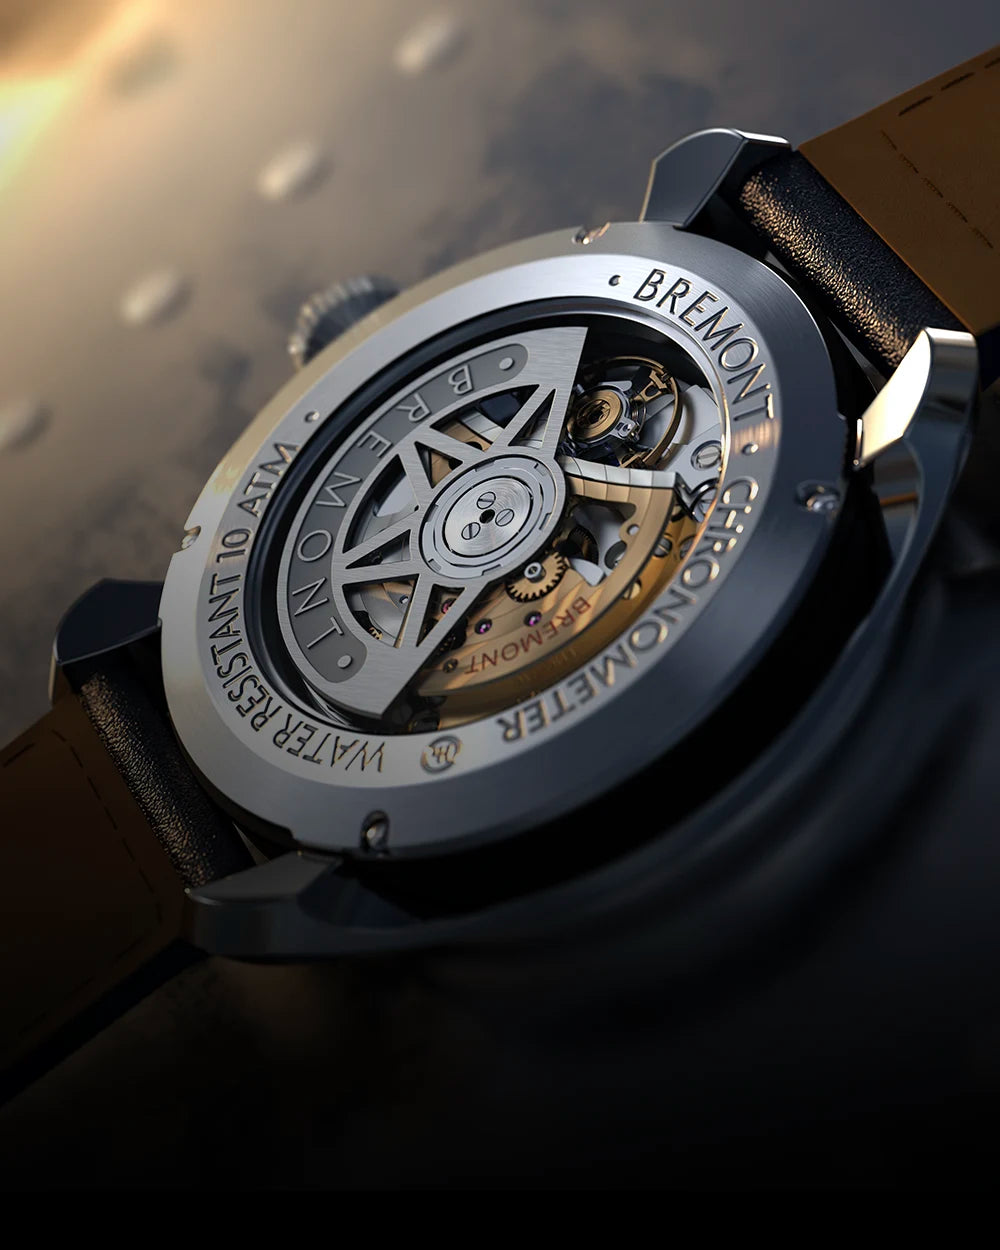 Every Bremont pilot watch is powered by a steadfast chronometer-rated mechanical movement.